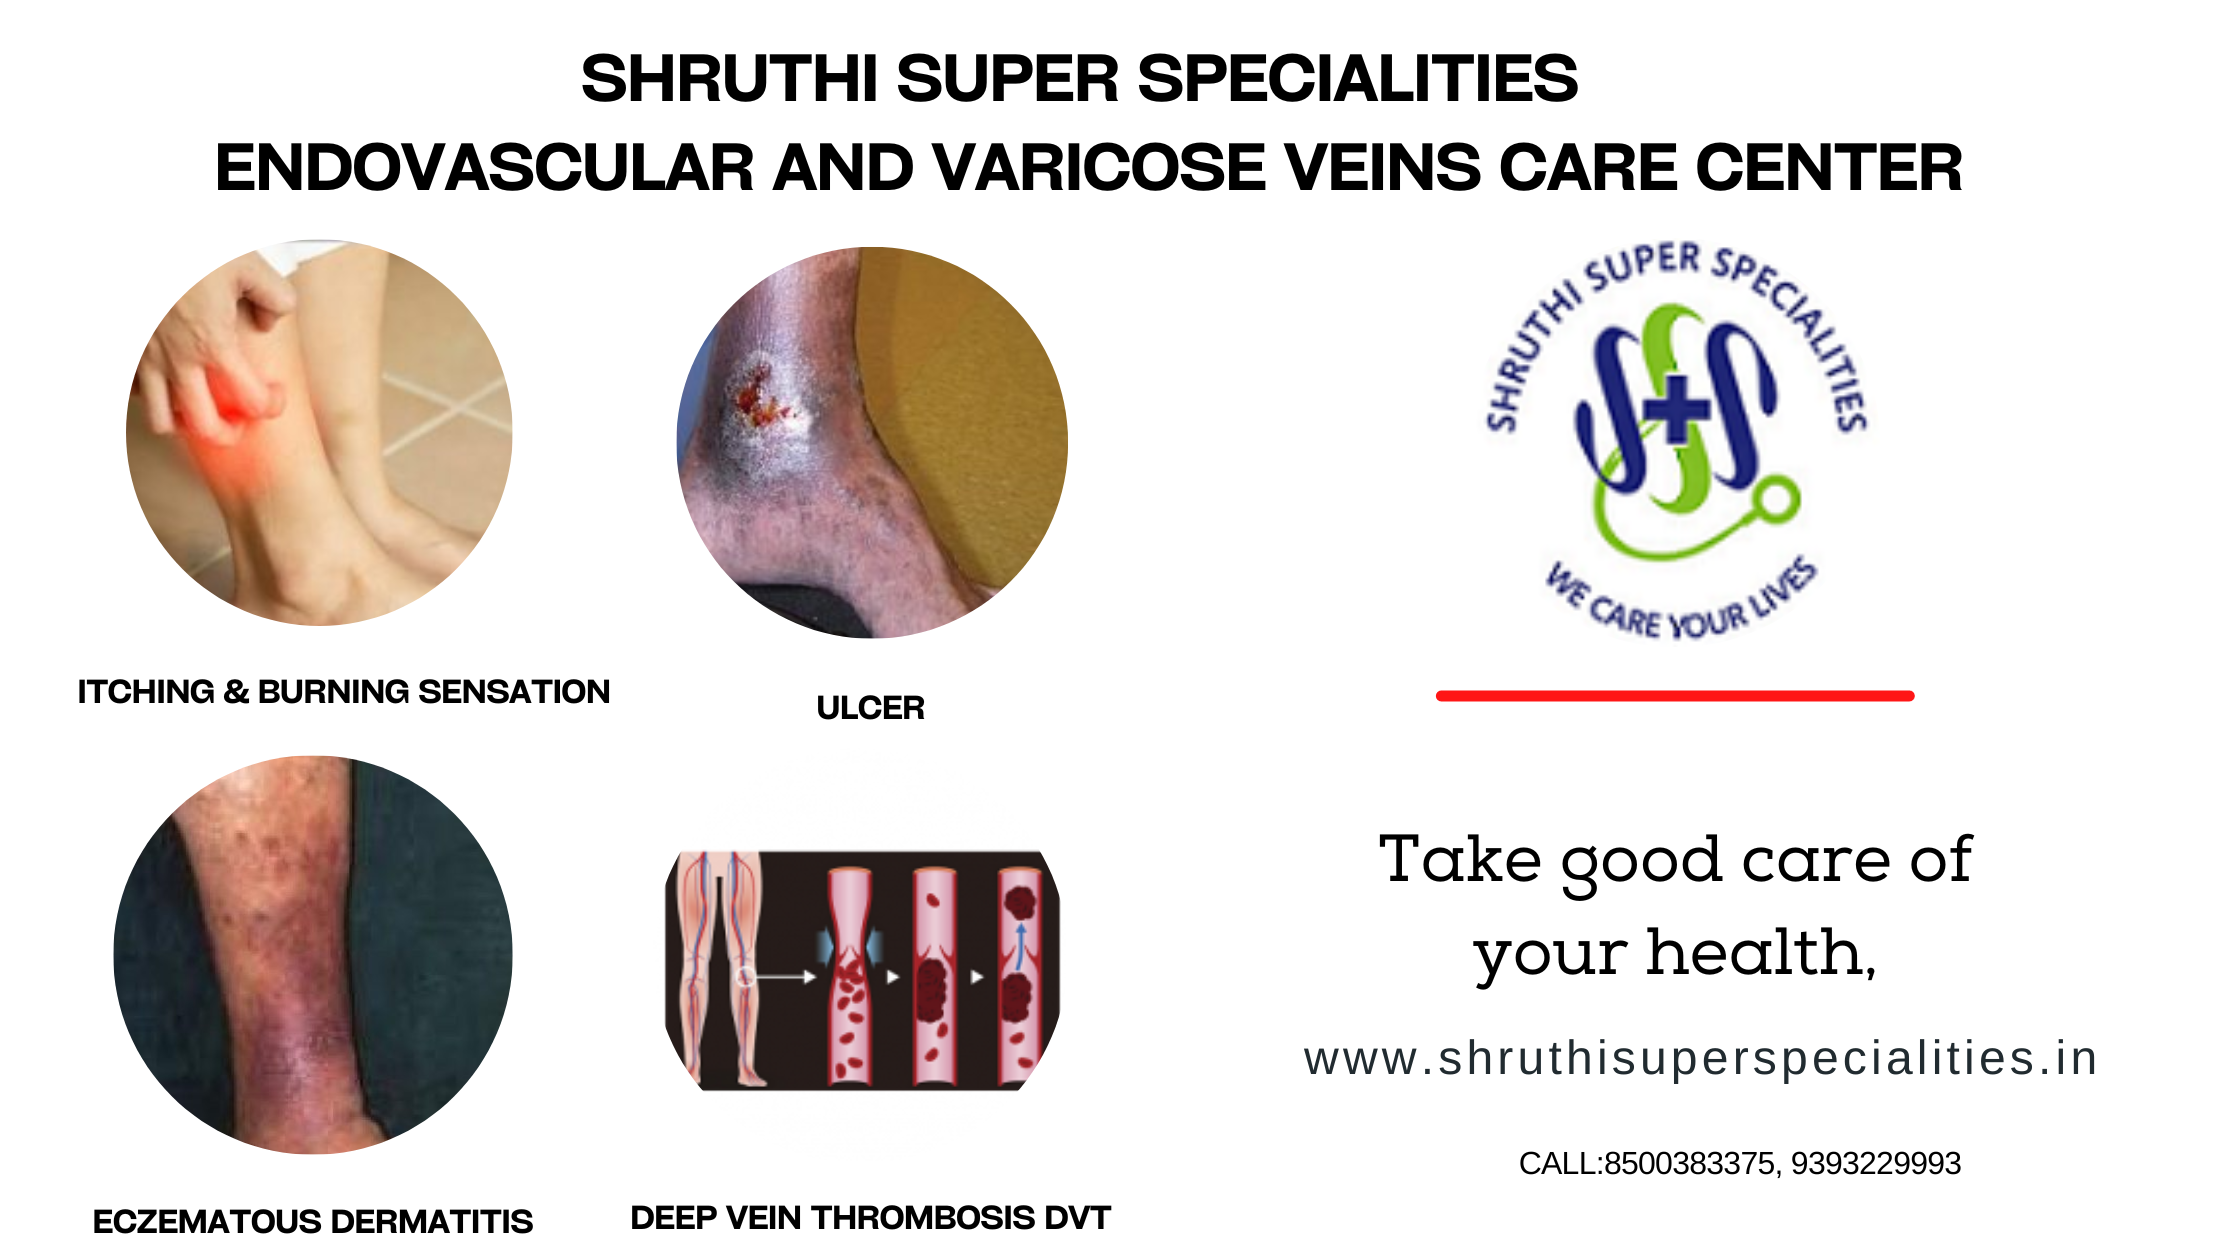 Shruthi Super Specialities – Providing the Best Varicose Veins Treatment in Hyderabad